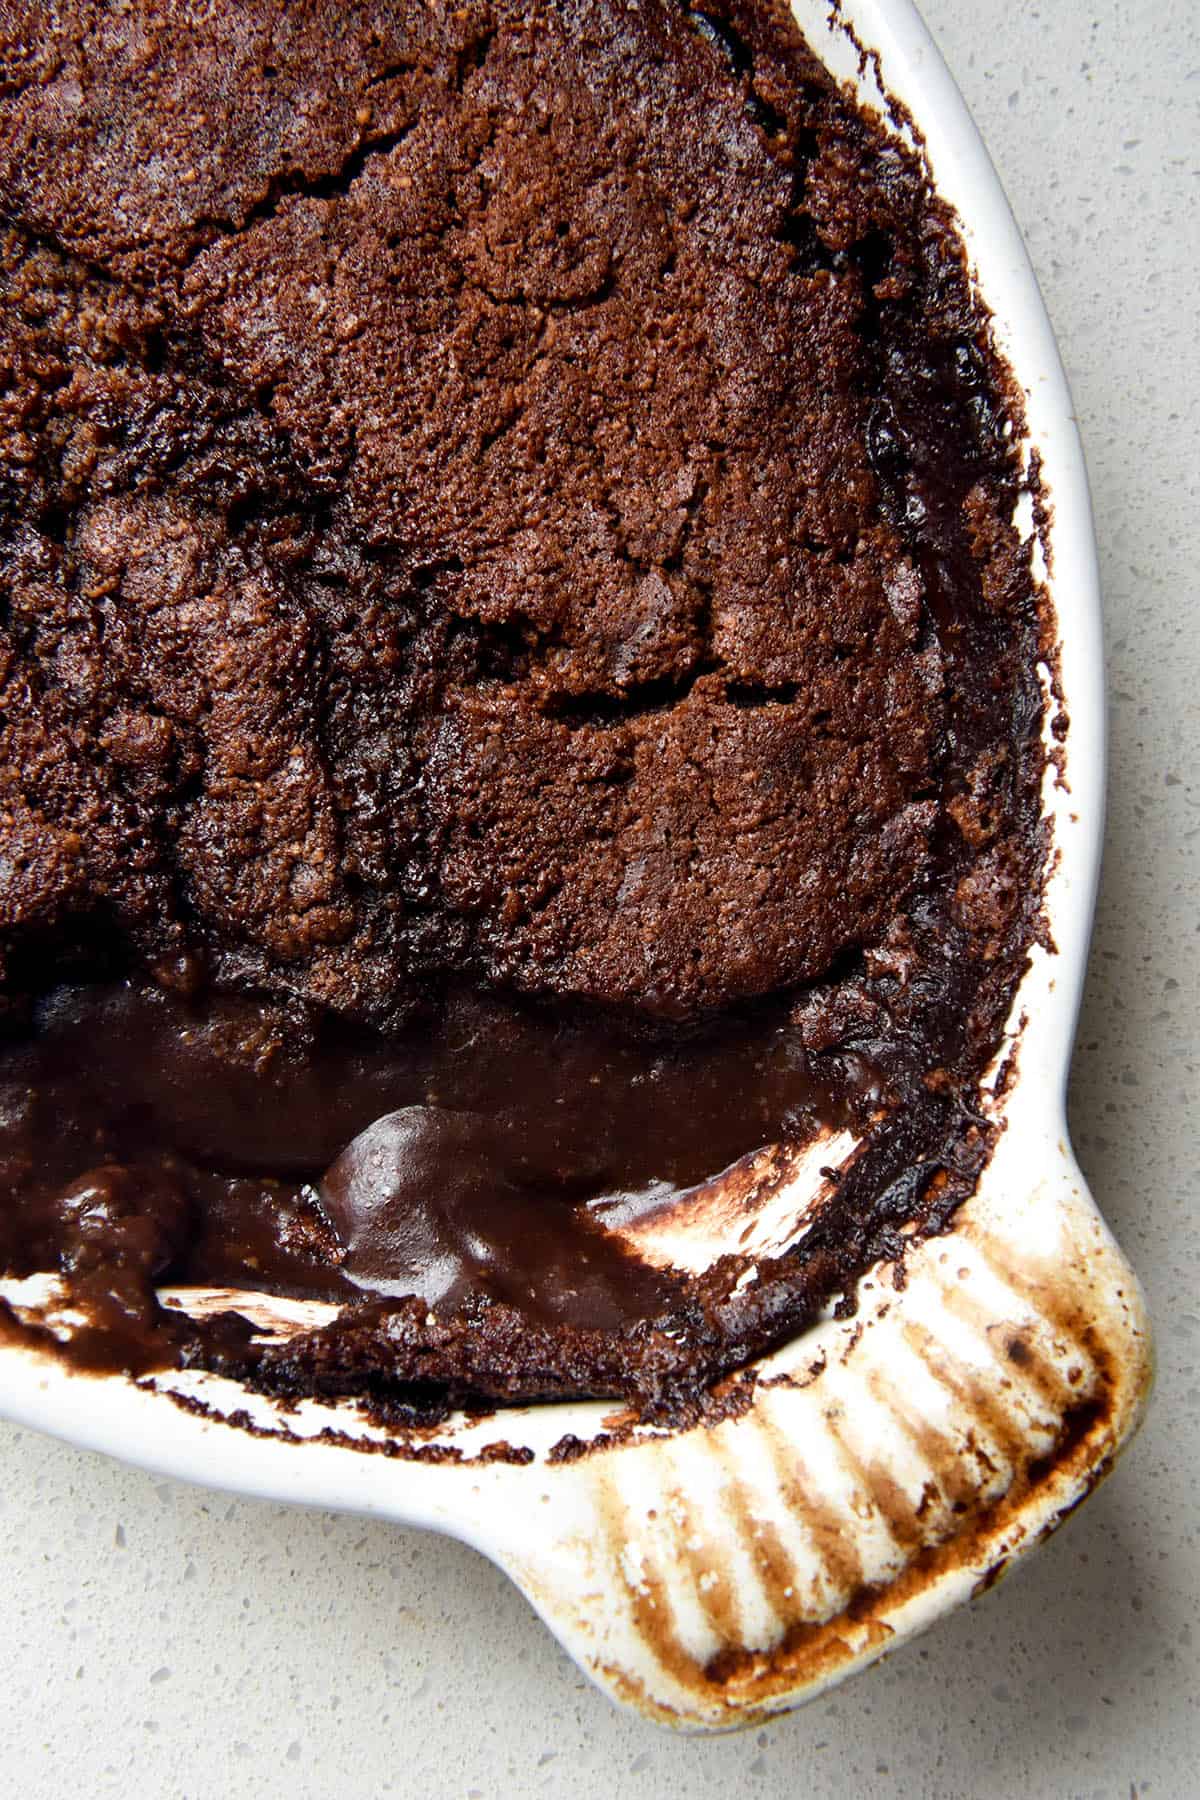 An aerial close up view of a gluten free chocolate self saucing pudding in an oval shaped white baking dish with fluted handles. Spoonfuls of the pudding have been removed and the pudding-like chocolate sauce oozes out from underneath